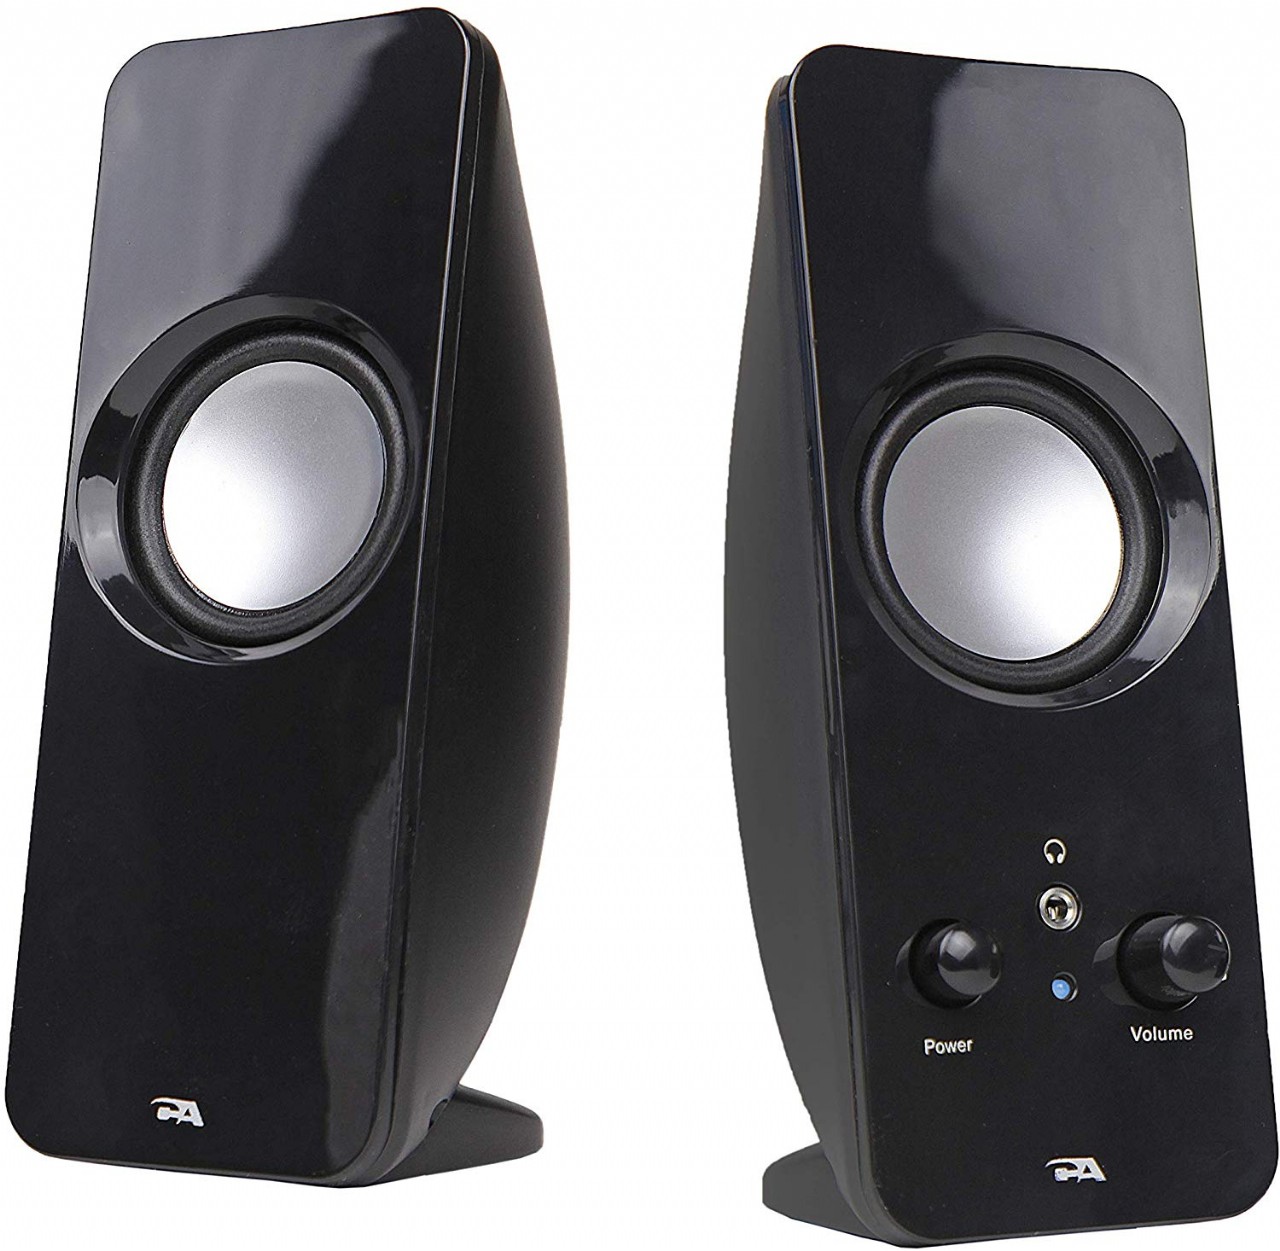 Computer speakers, a powerful 2.0 desktop speaker system from Cyber Acoustics (CA-2050)